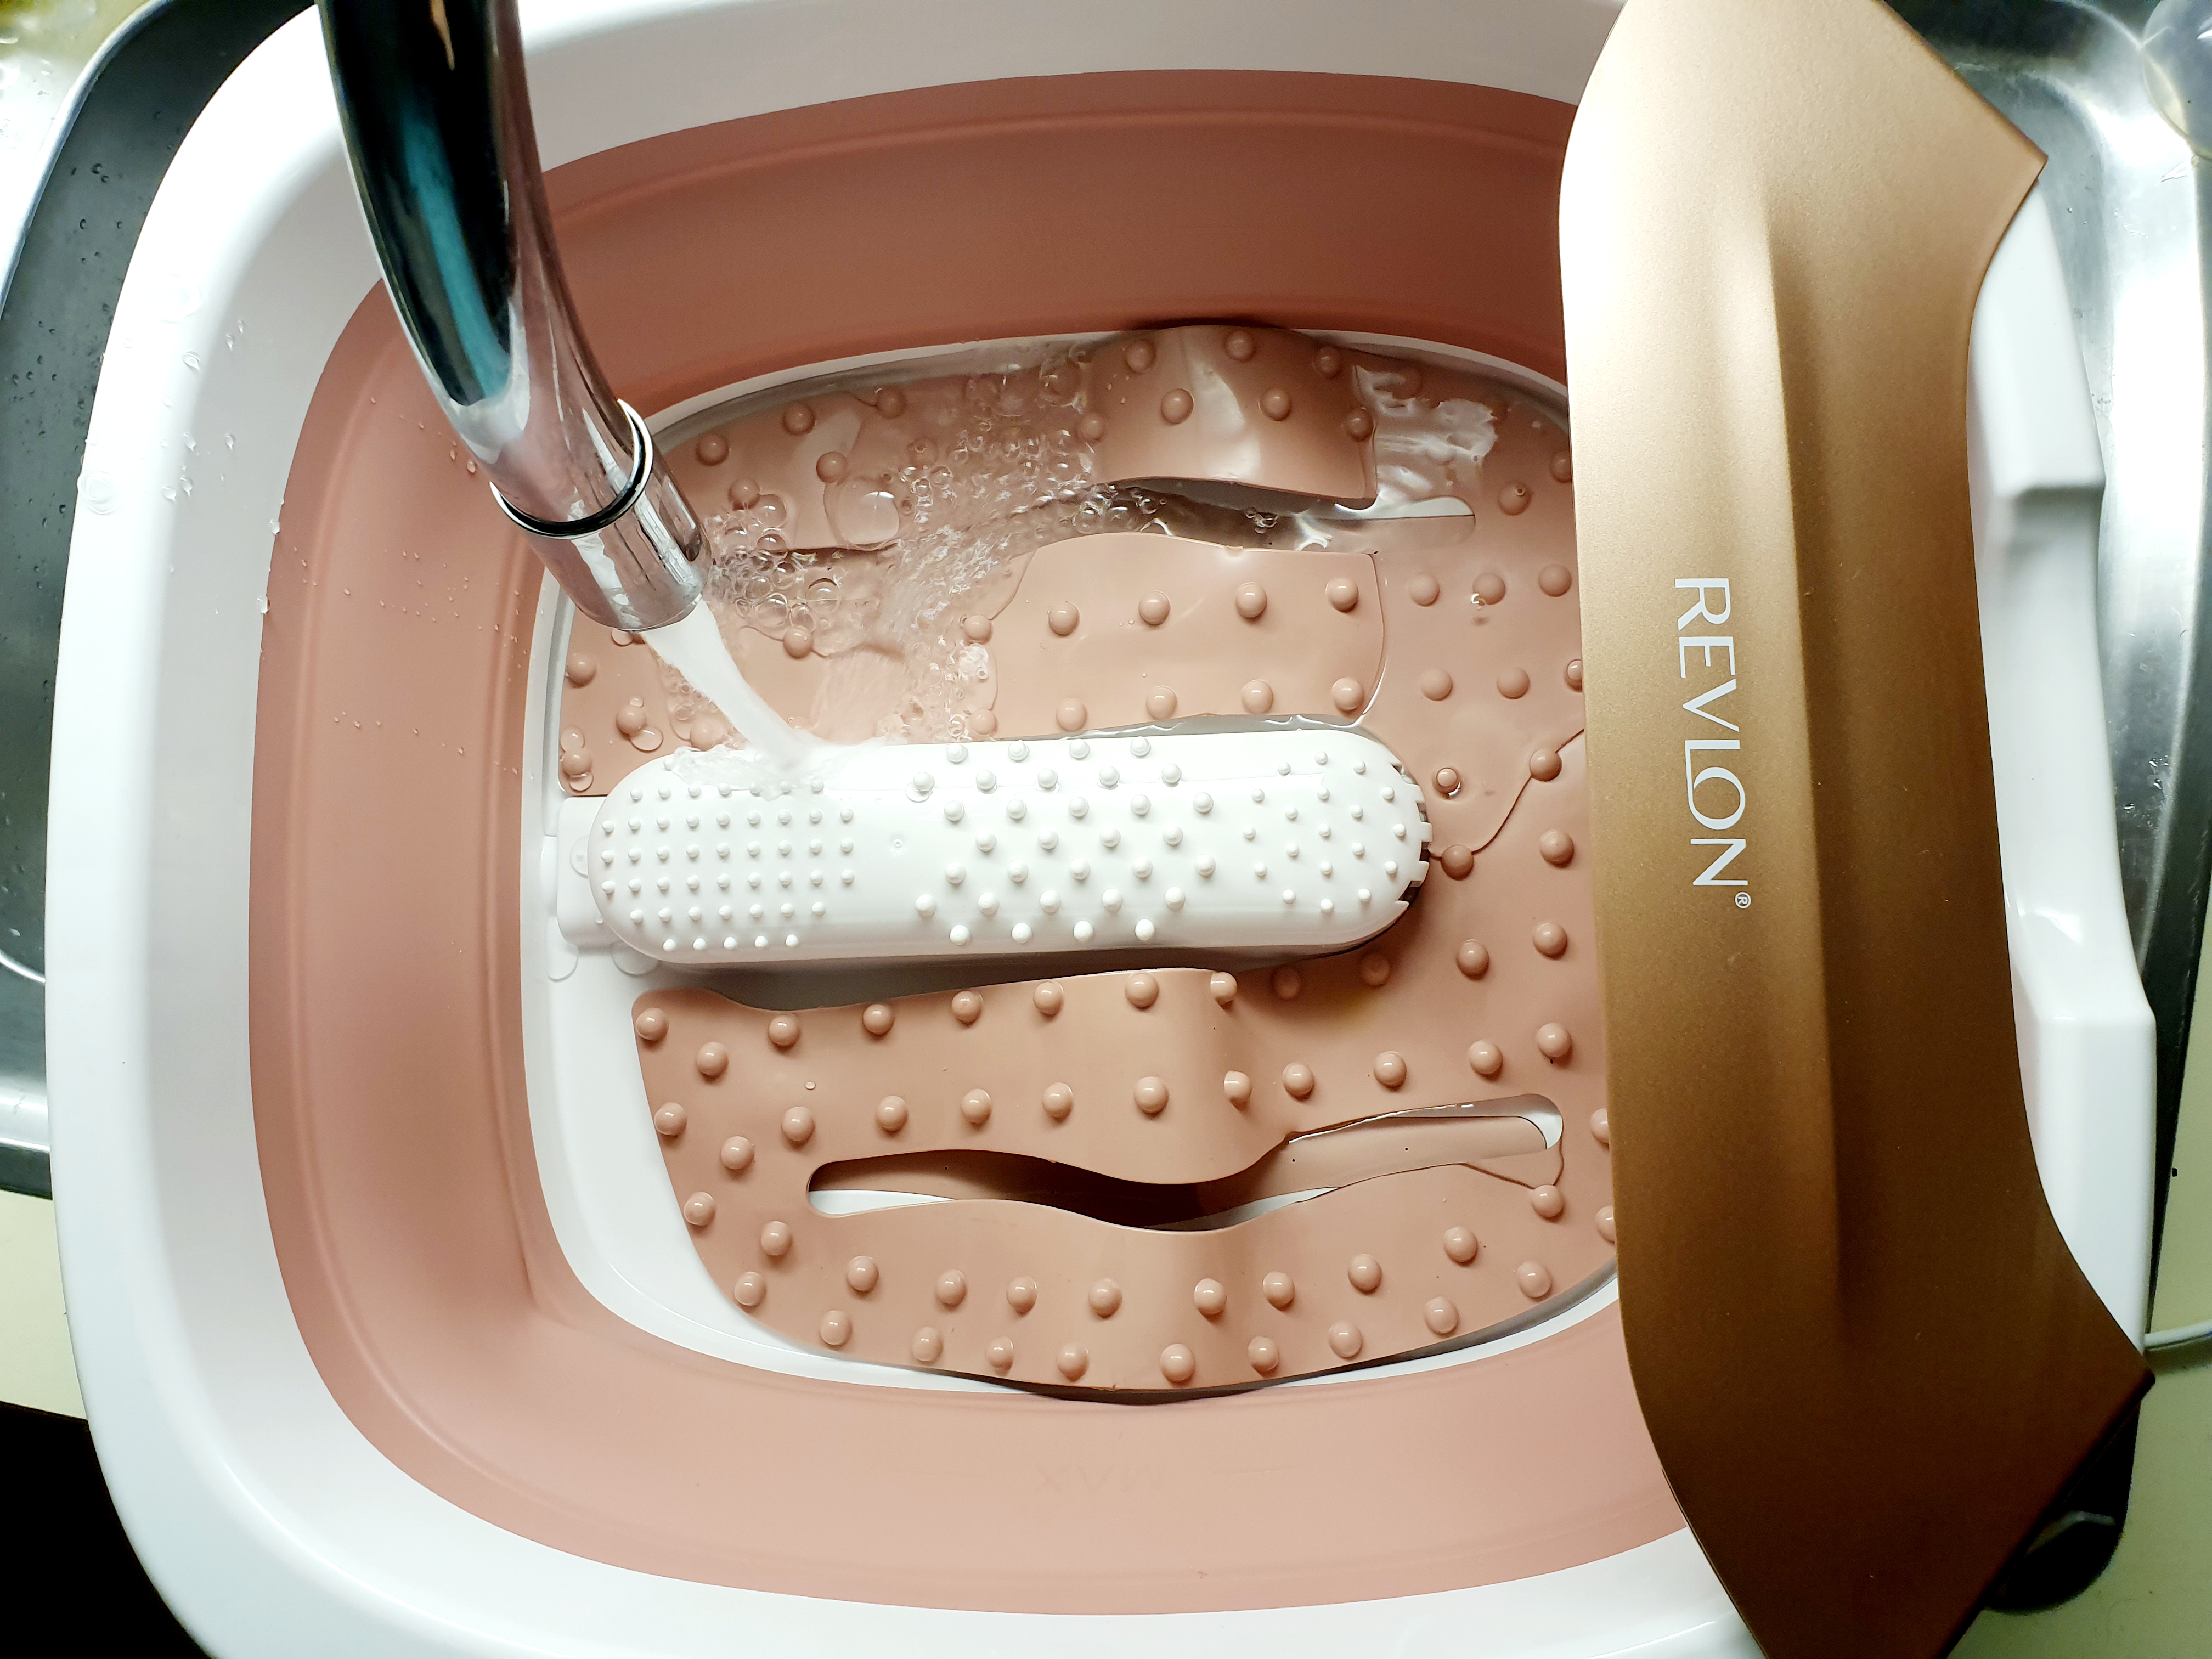 Revlon ULTIMATE indulgence foot spa | Agent luxe blog